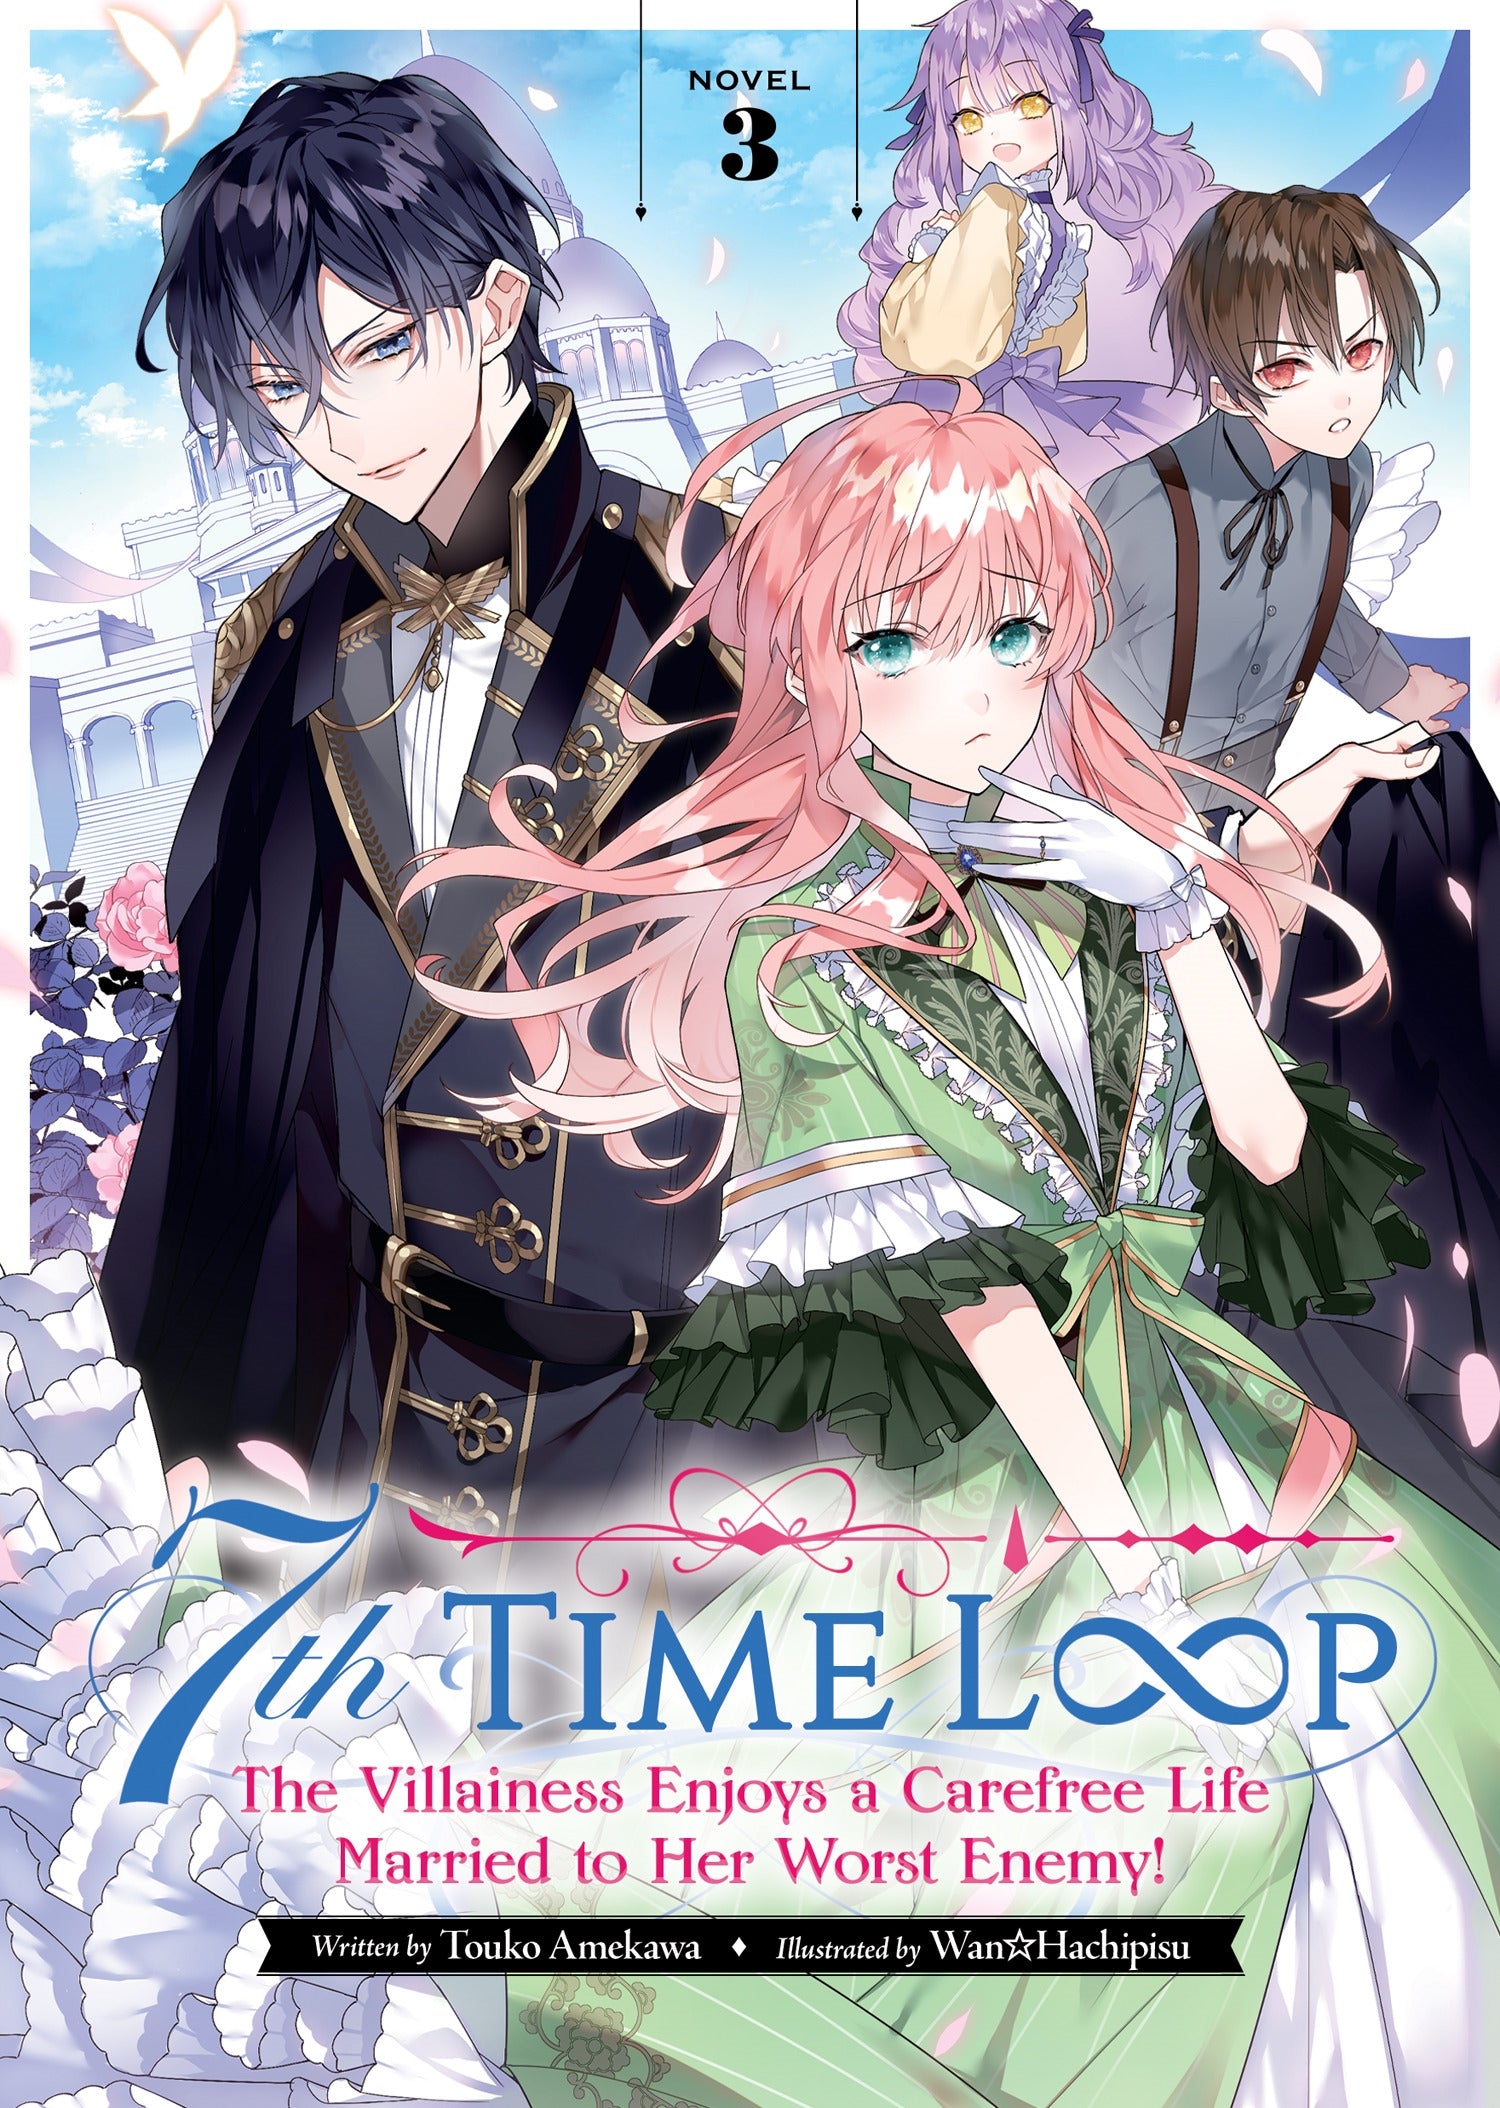 7th Time Loop The Villainess Enjoys a Carefree Life Married to Her Worst Enemy! (Light Novel) Vol. 3